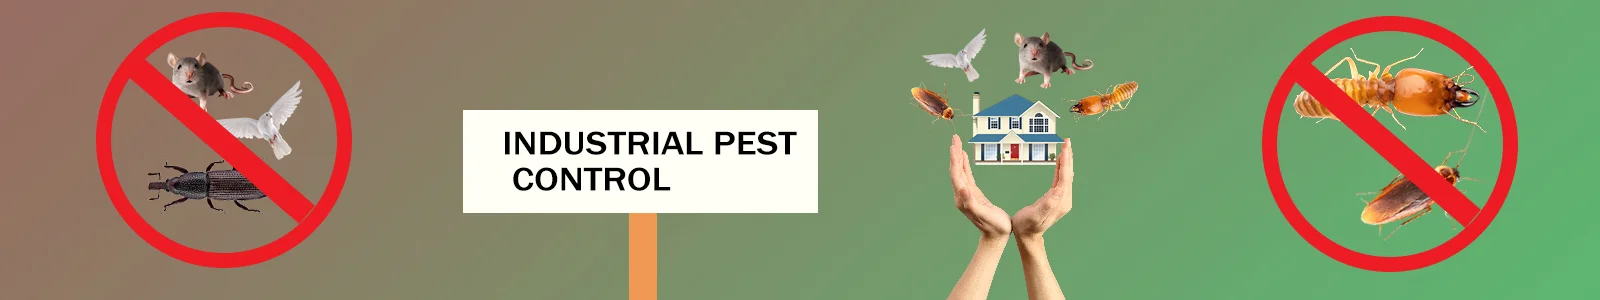 Industrial Weed Pest Control Services